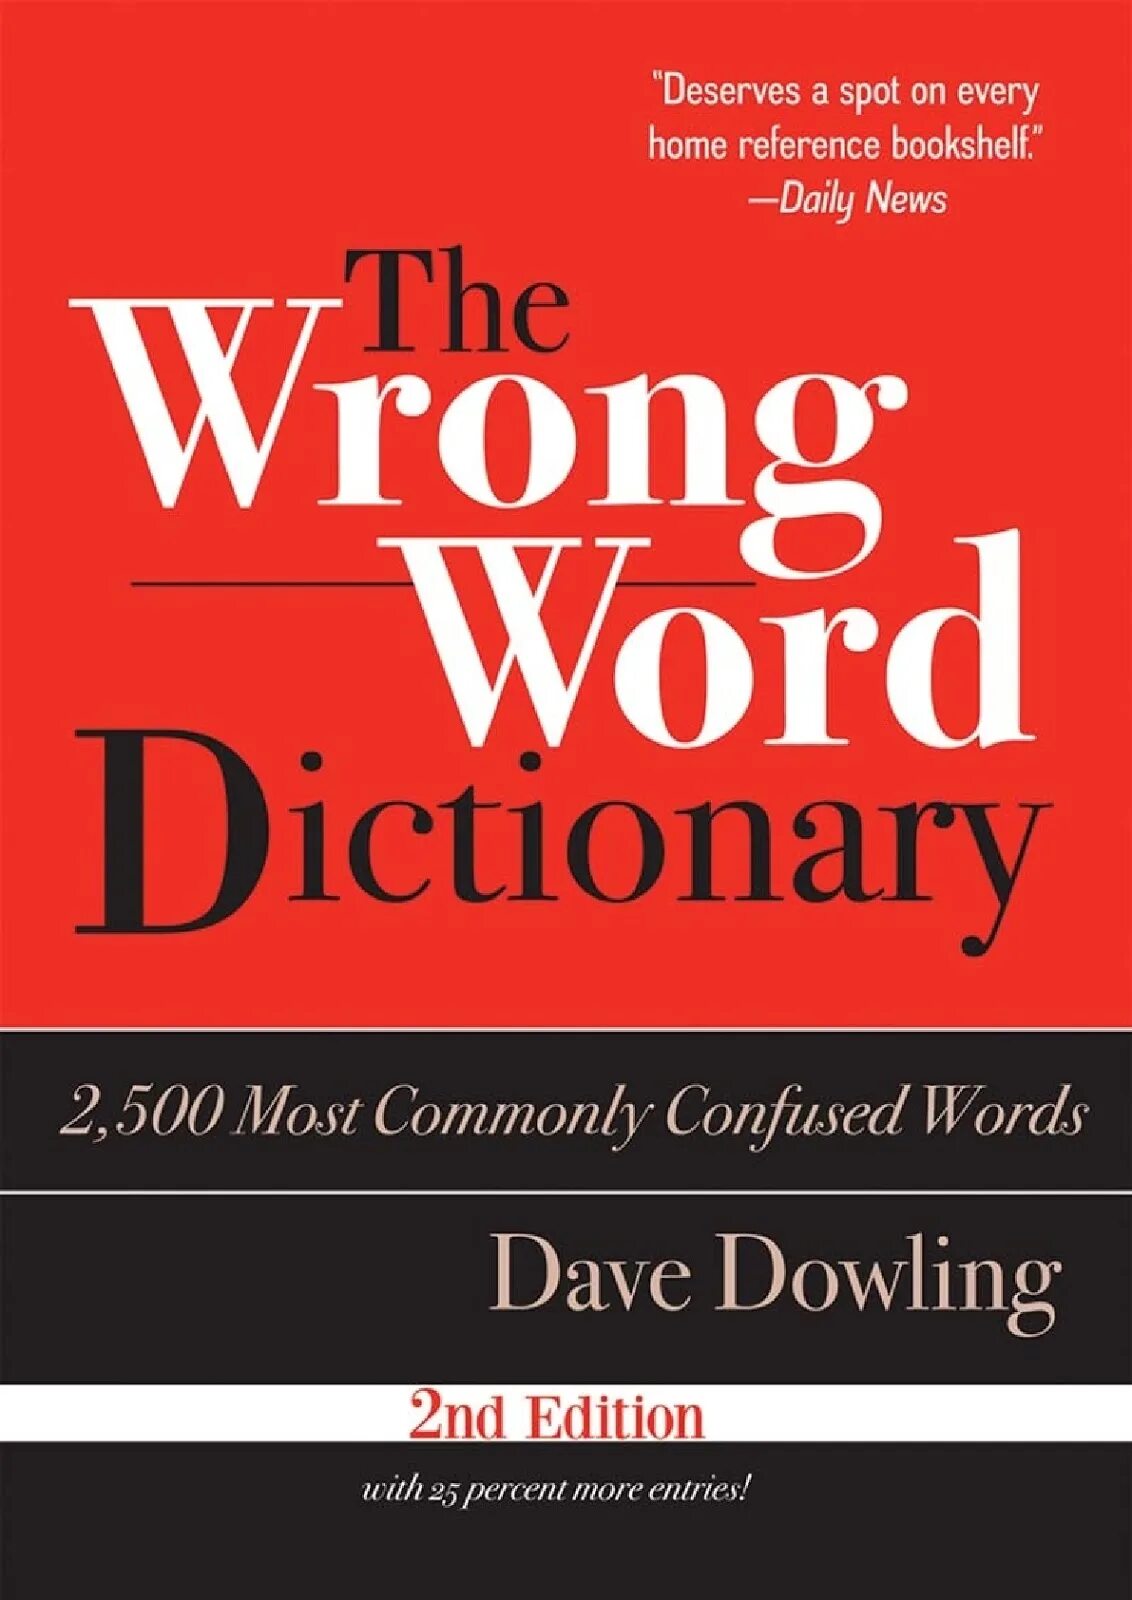 Two dictionary. Dictionary Words. Wrong Word. Dictionnaire словарь 2019. What is the New Words Dictionary.